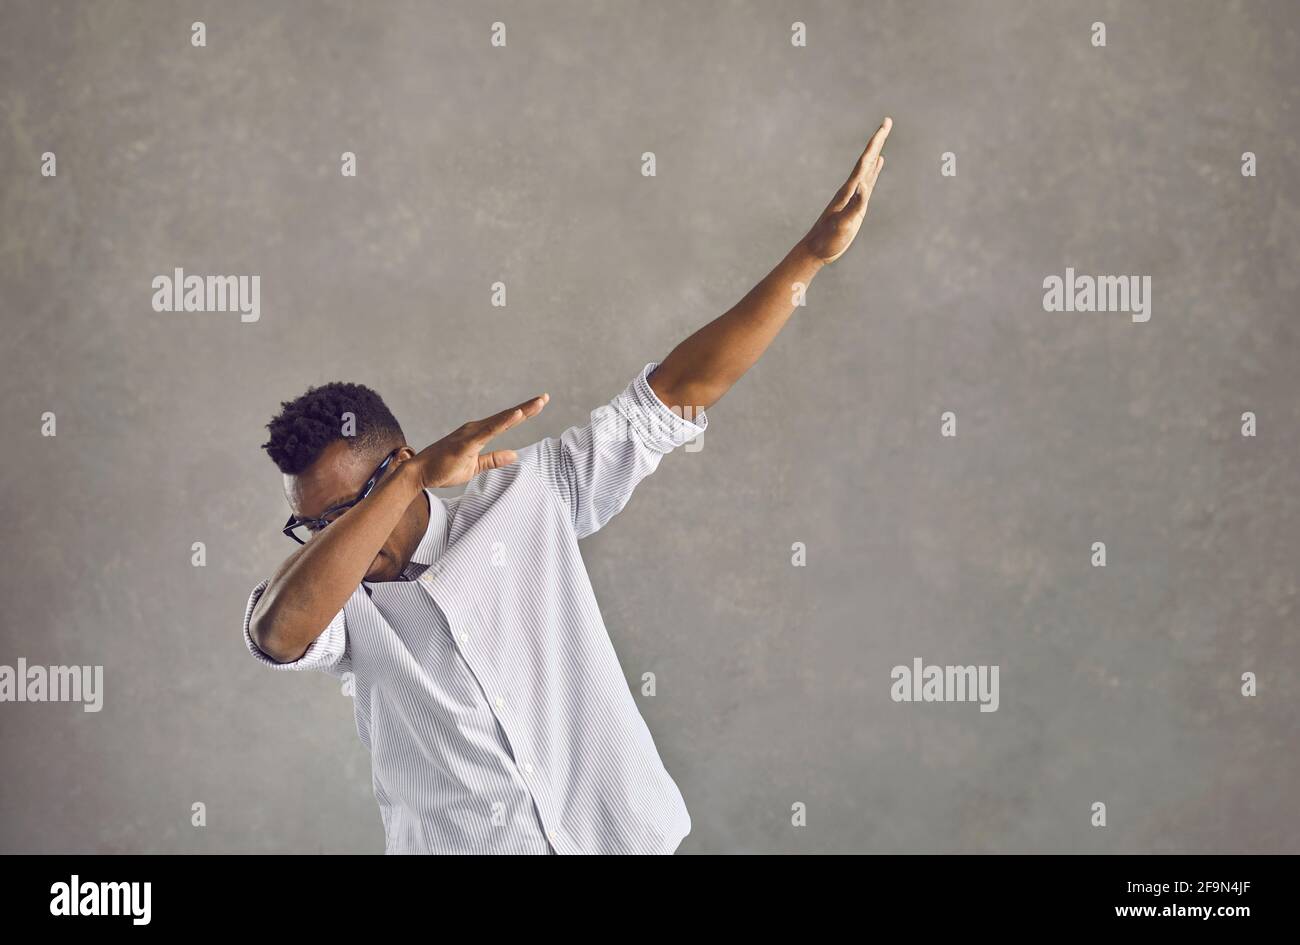 young black man doing popular dab dance move isolated on gray concrete background 2F9N4JF